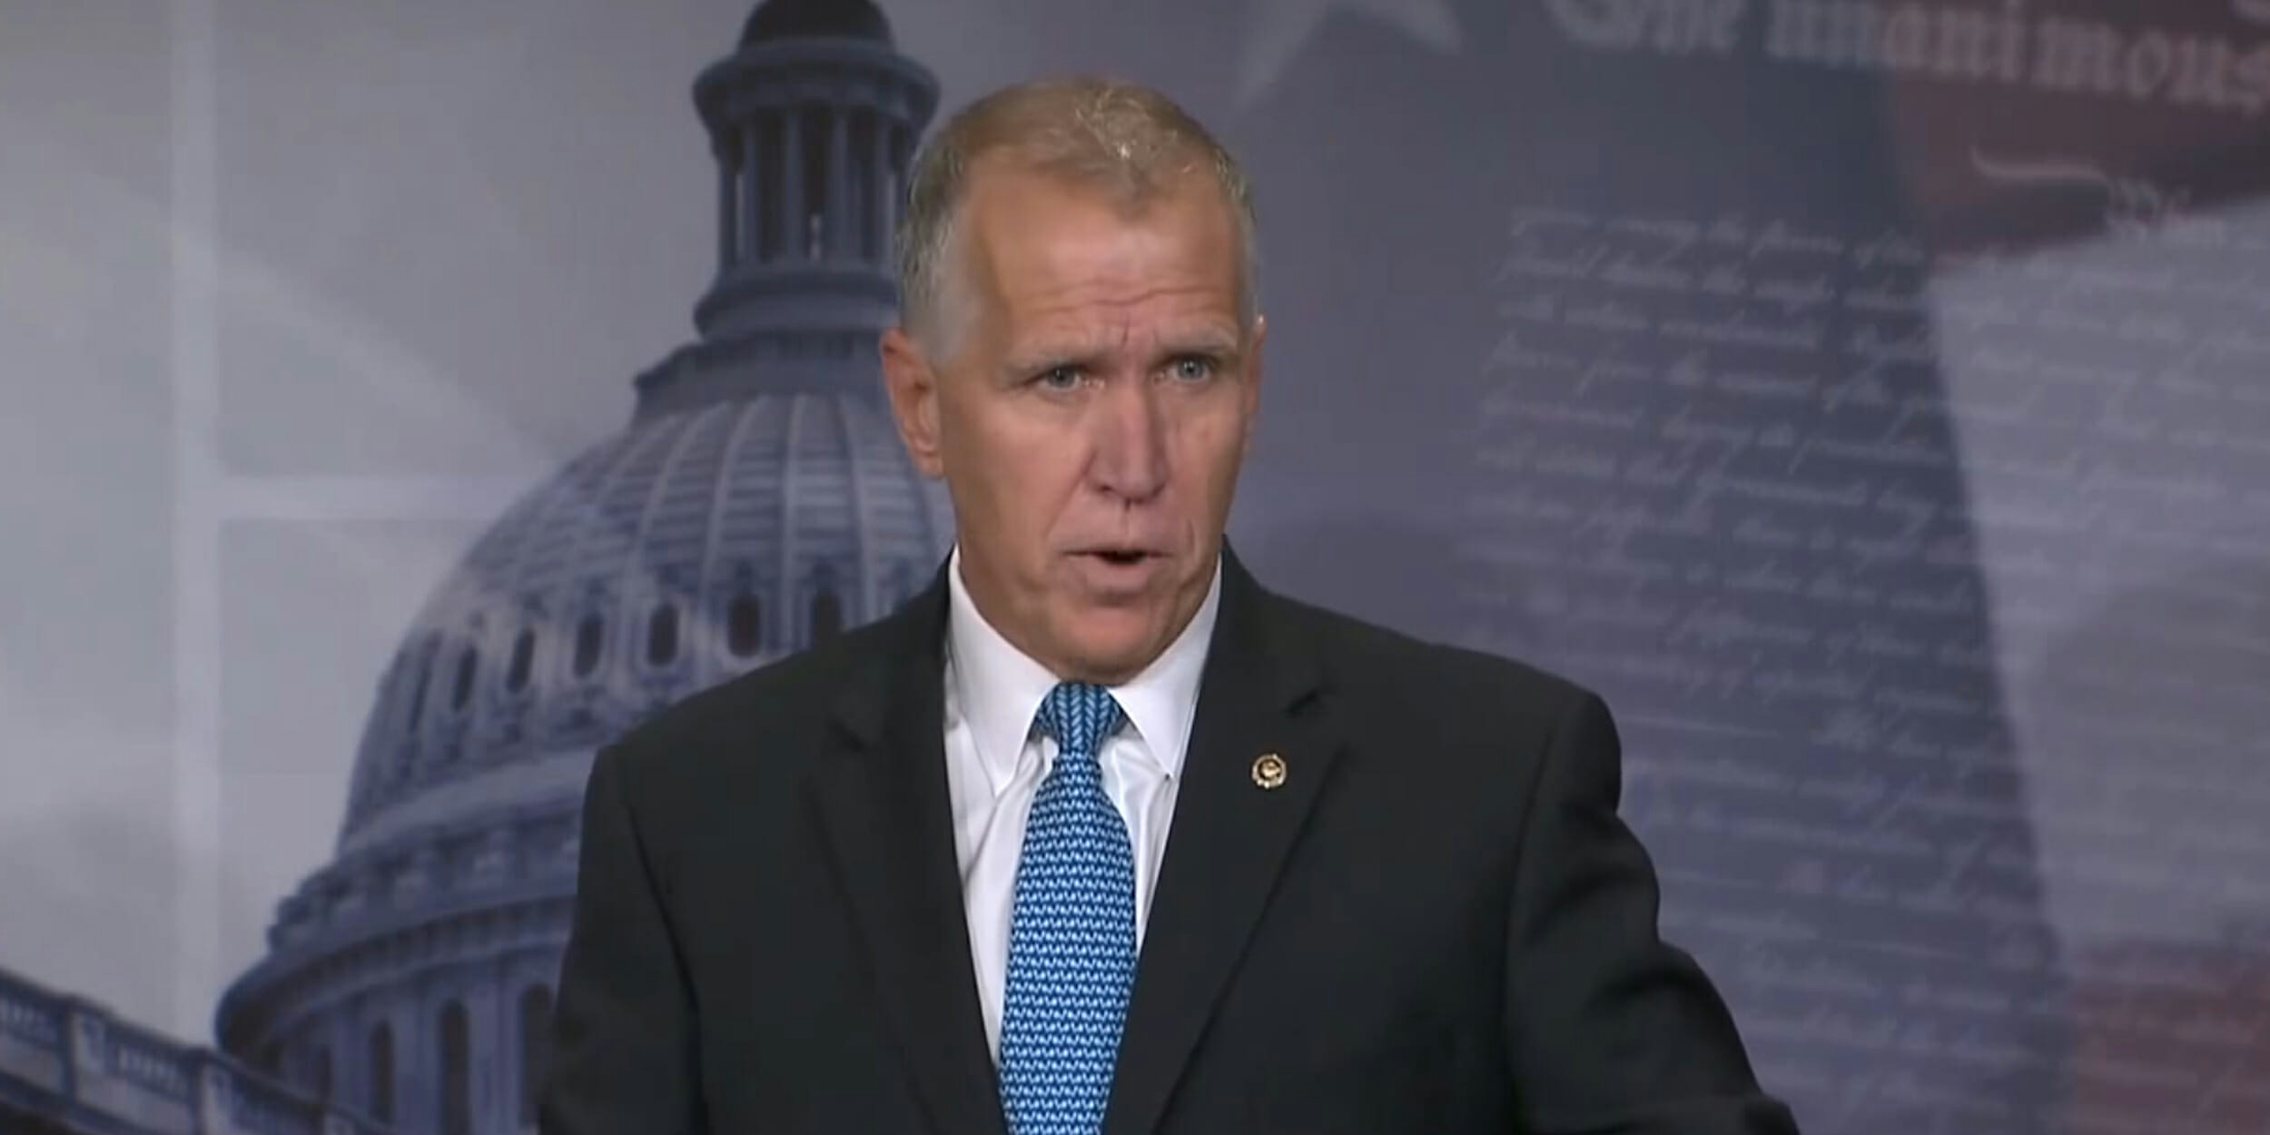 Republican senators, such as Sen. Thom Tillis, have unveiled a bill on Monday that they hope will reform the Deferred Action for Childhood Arrivals (DACA) program.